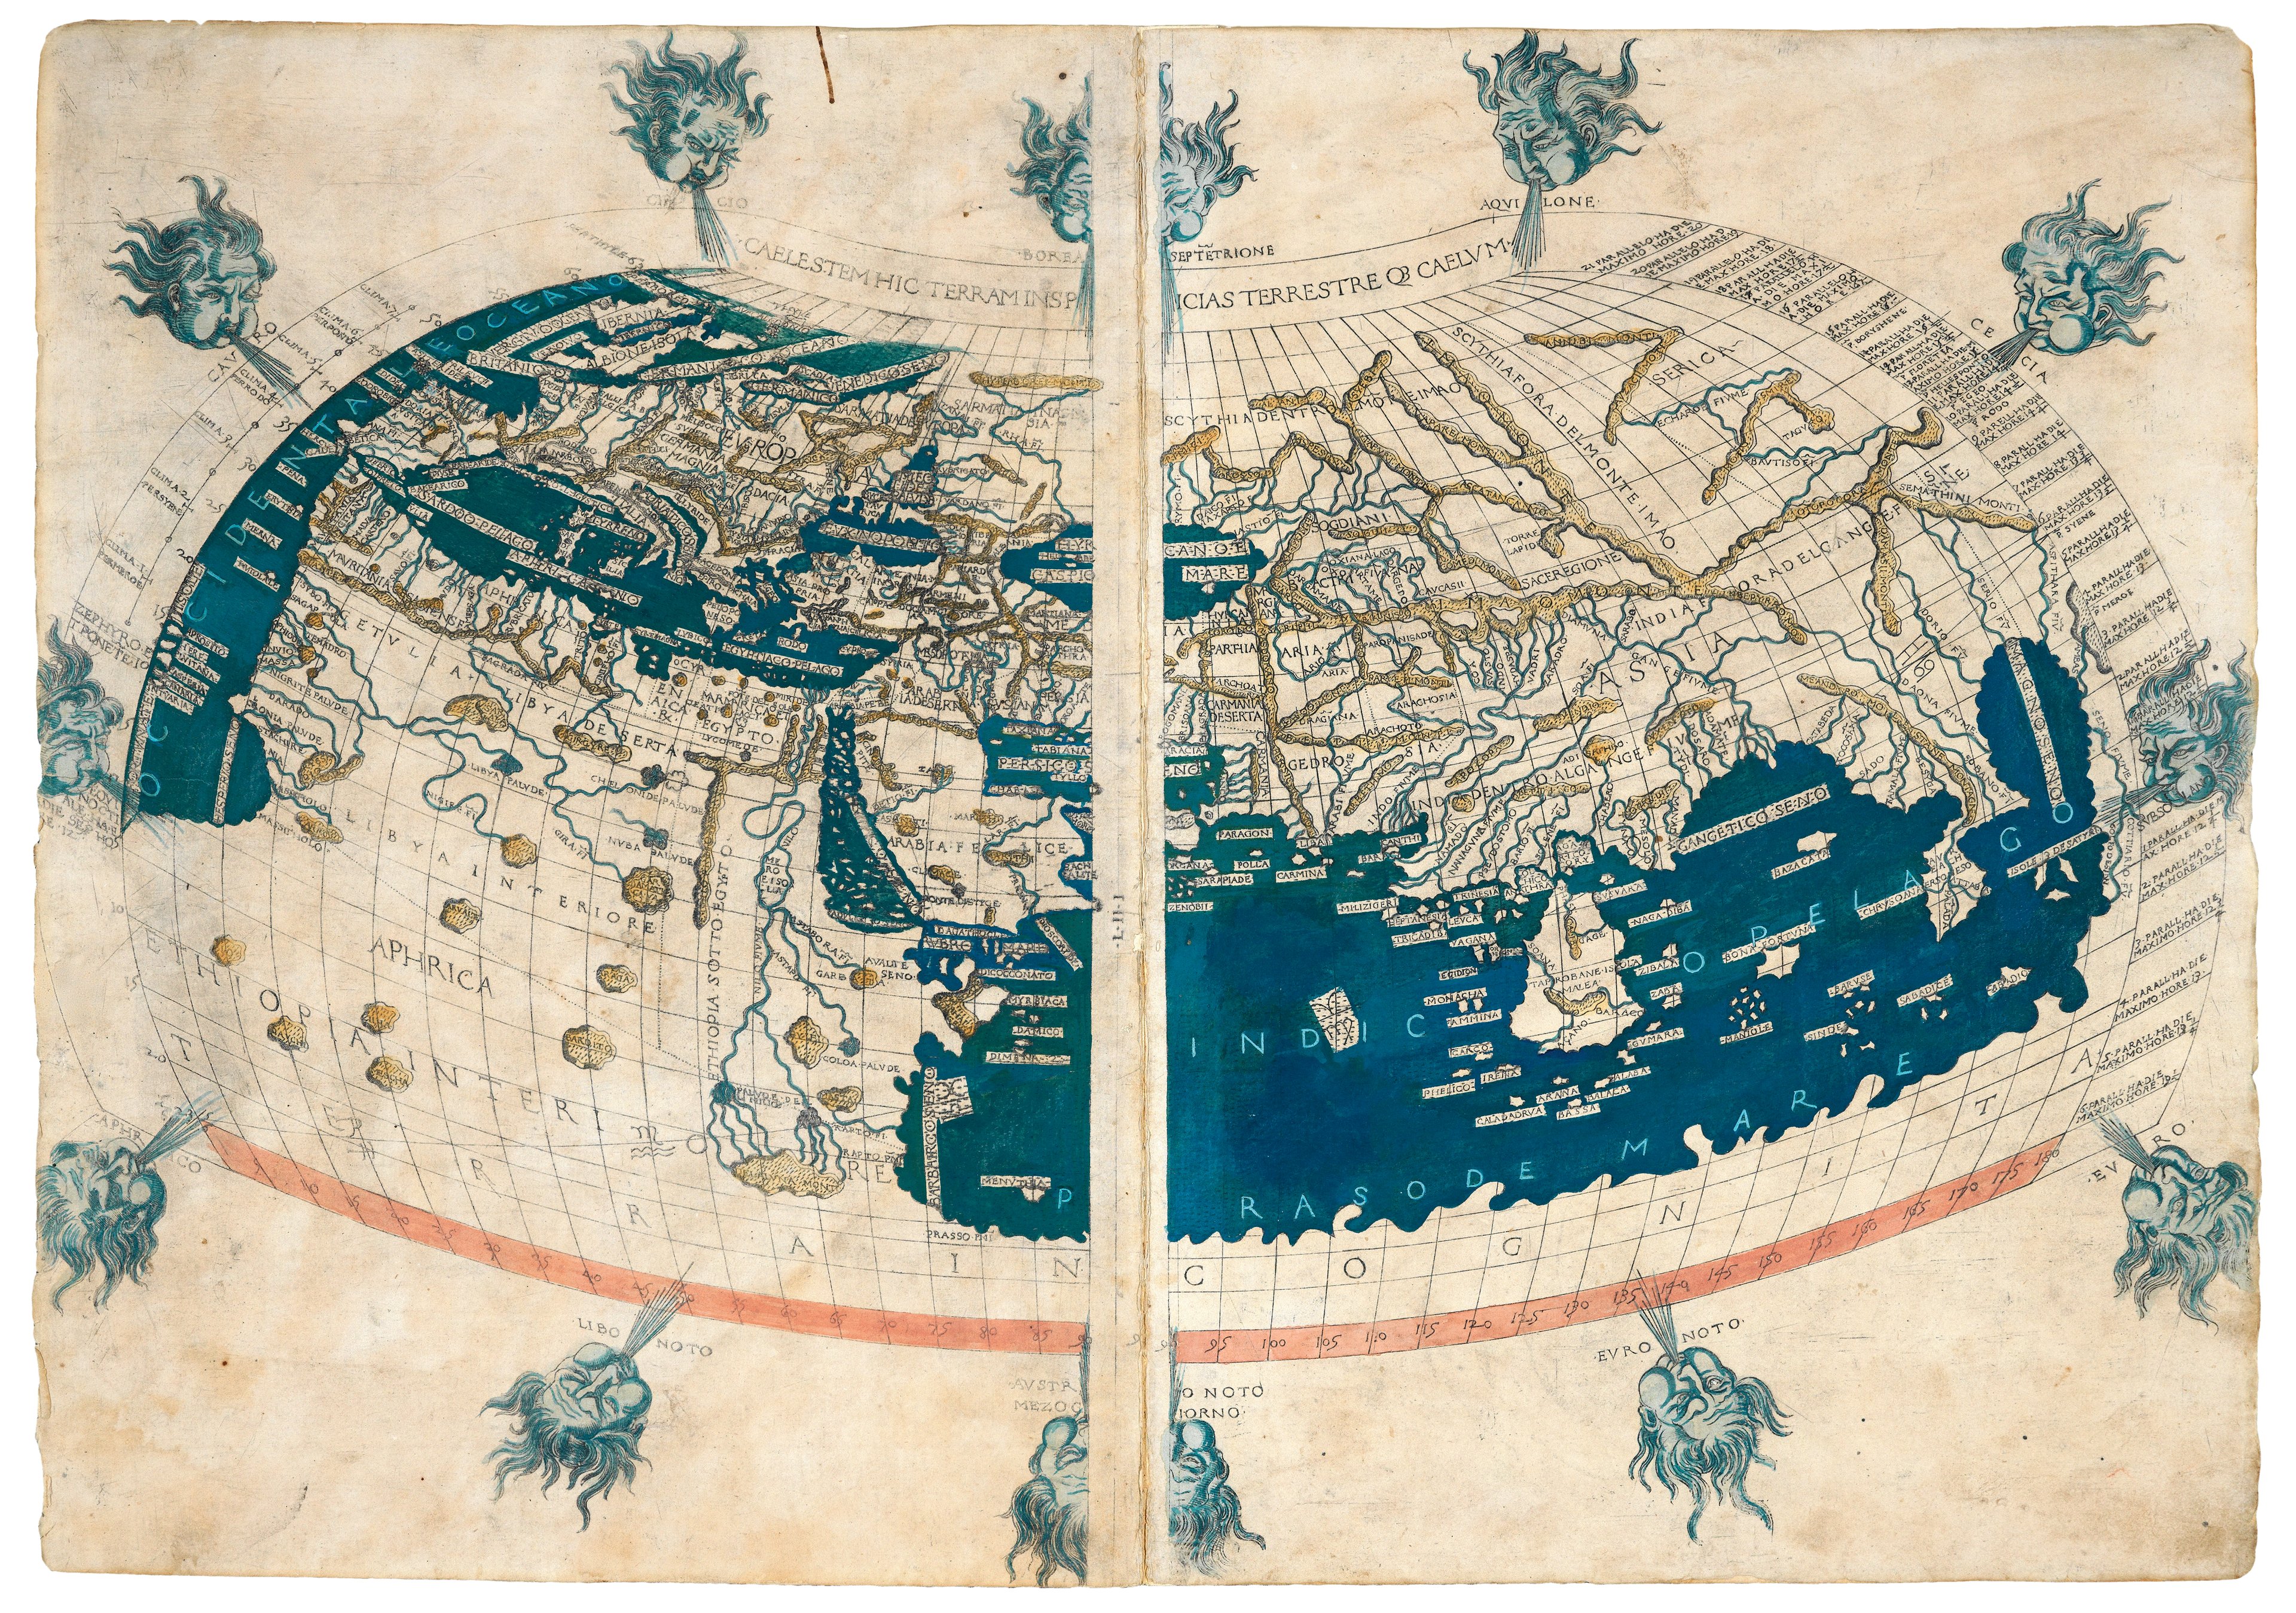 Berlinghieri's Ptolemaic world map with vibrant hand-drawn colour, featuring 12 Windheads around the outside of the map